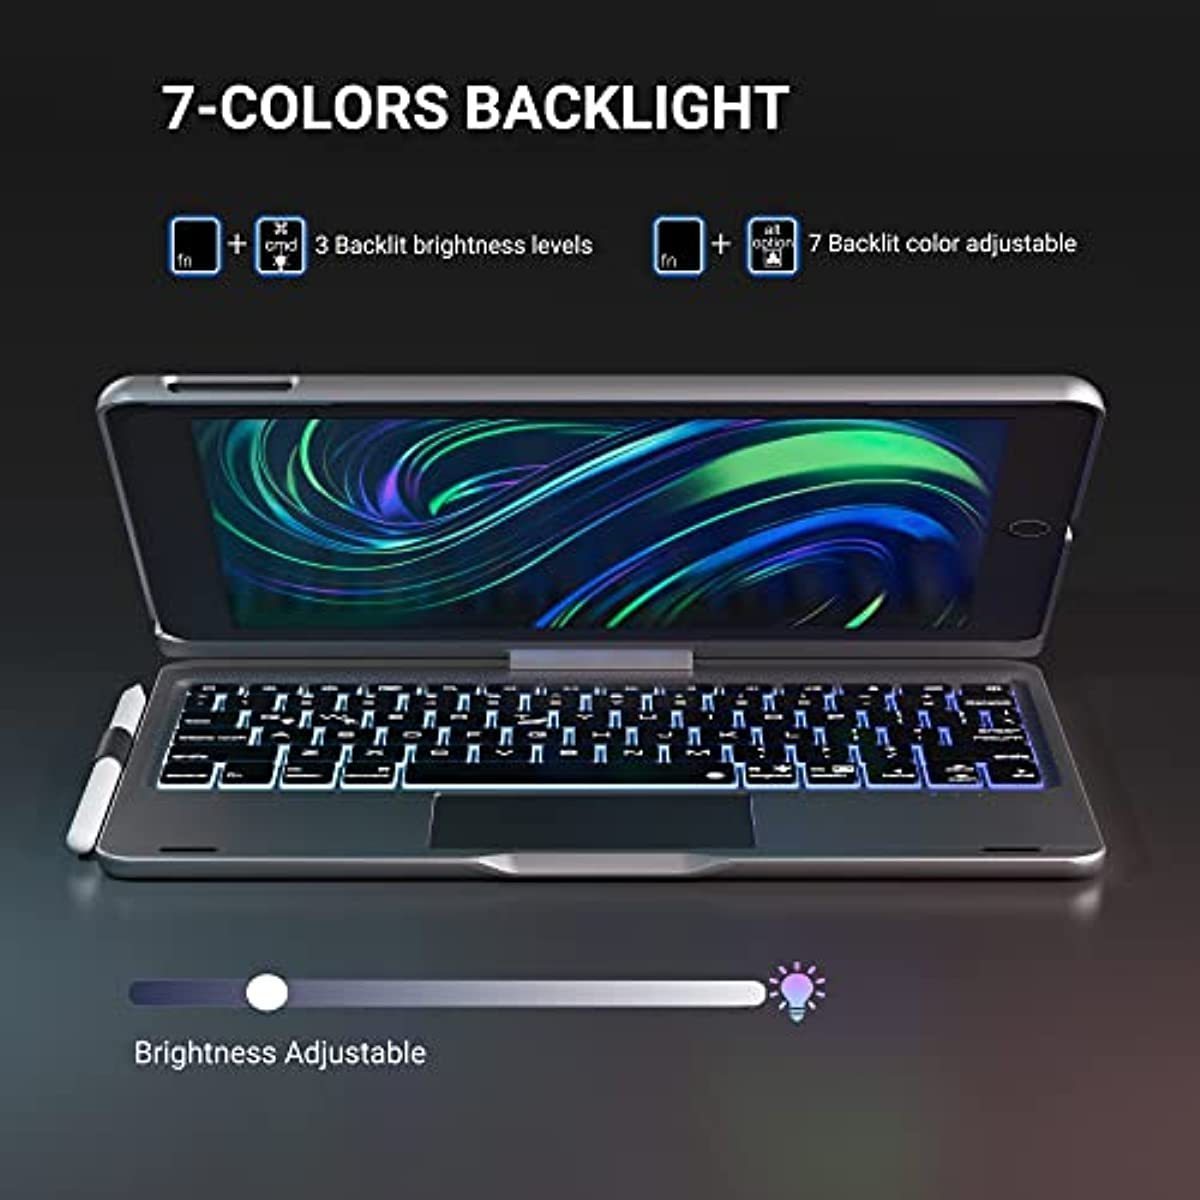 

Keyboard Case For Inch 9th 8th 7th Generation 2021 2020 And For Ipad Pro 10.5 Air 3th Gen Trackpad Smart Magic Backlit Cover Pen Holder Rotate Space Gloden Rose/cool Black